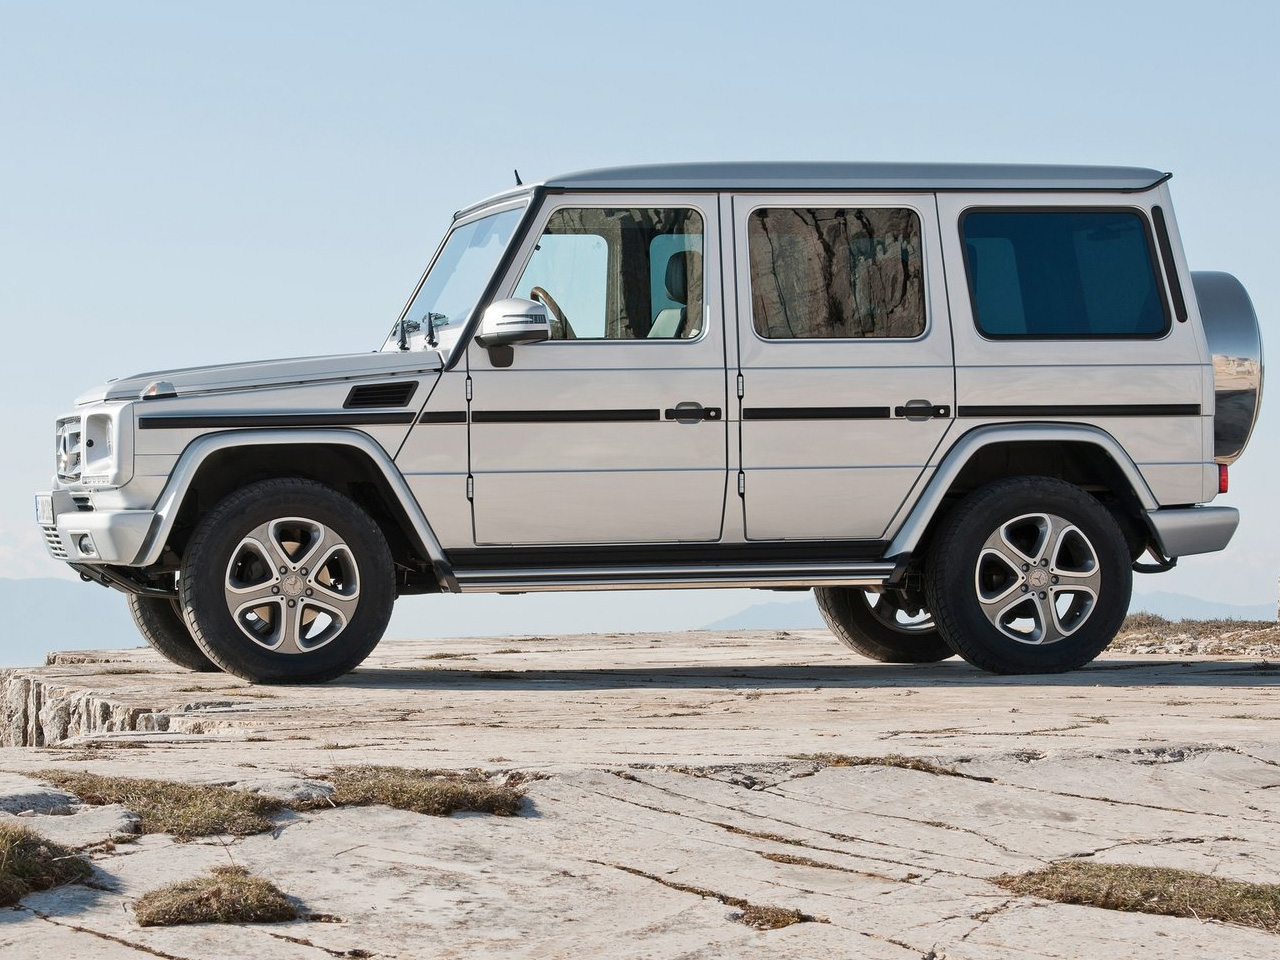  Mercedes Benz G Class Wallpapers Pictures Pics